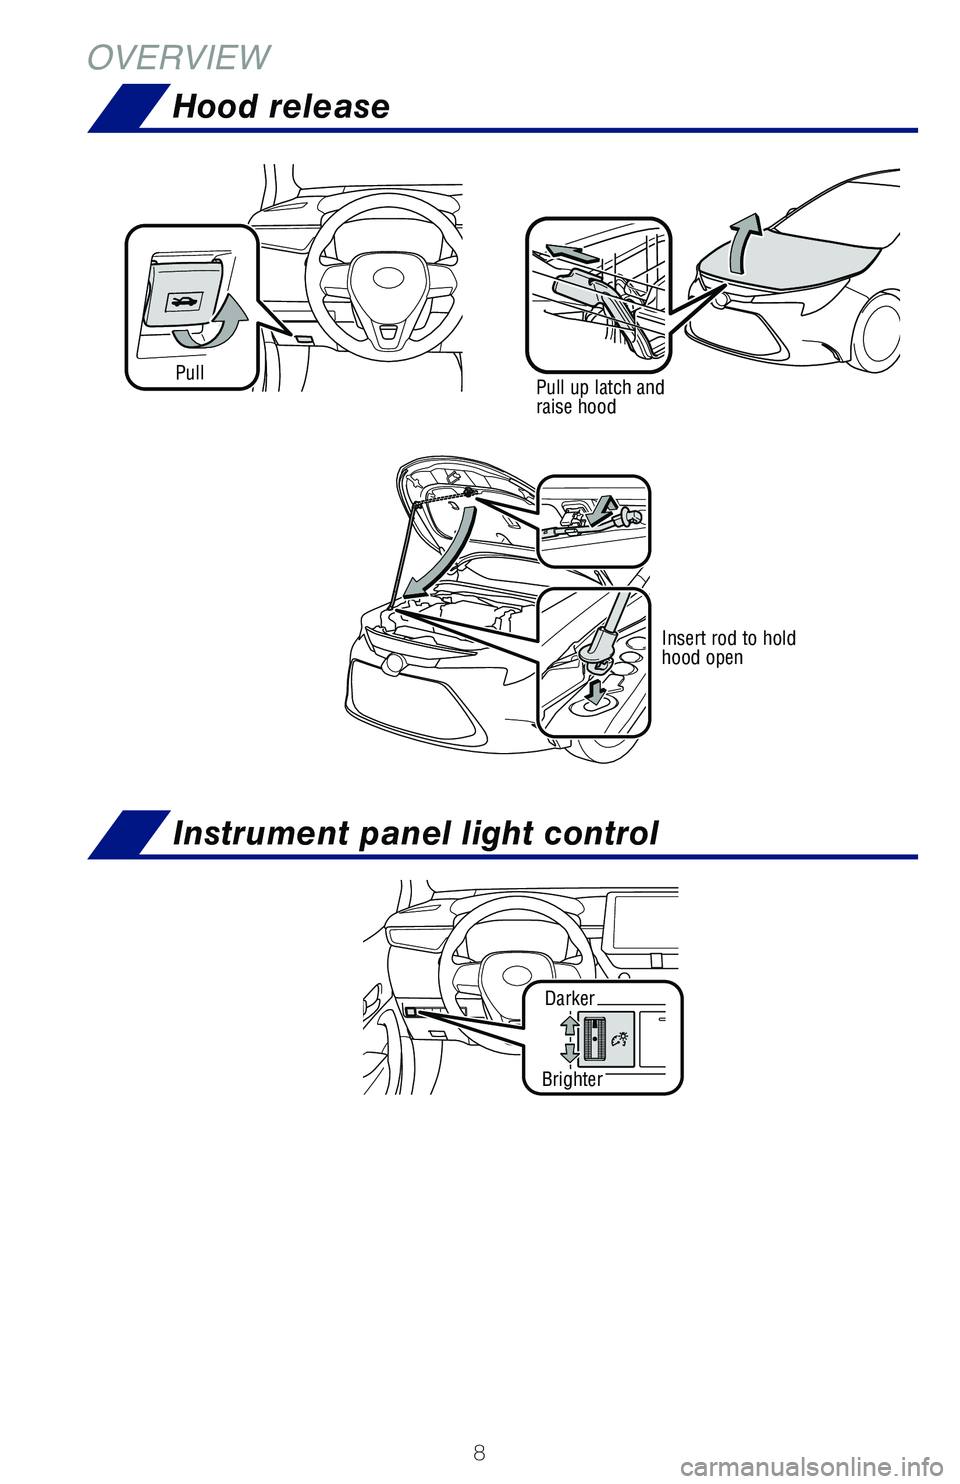 TOYOTA COROLLA 2020  Owners Manual (in English) 8
OVERVIEW
Pull up latch and 
raise hoodPull
Insert rod to hold 
hood open
Hood release
Instrument panel light control
Darker
Brighter
117388_A_MY20_Corolla_QRG_V5_ML_1219_Text_R1.indd   81/2/19   4:2